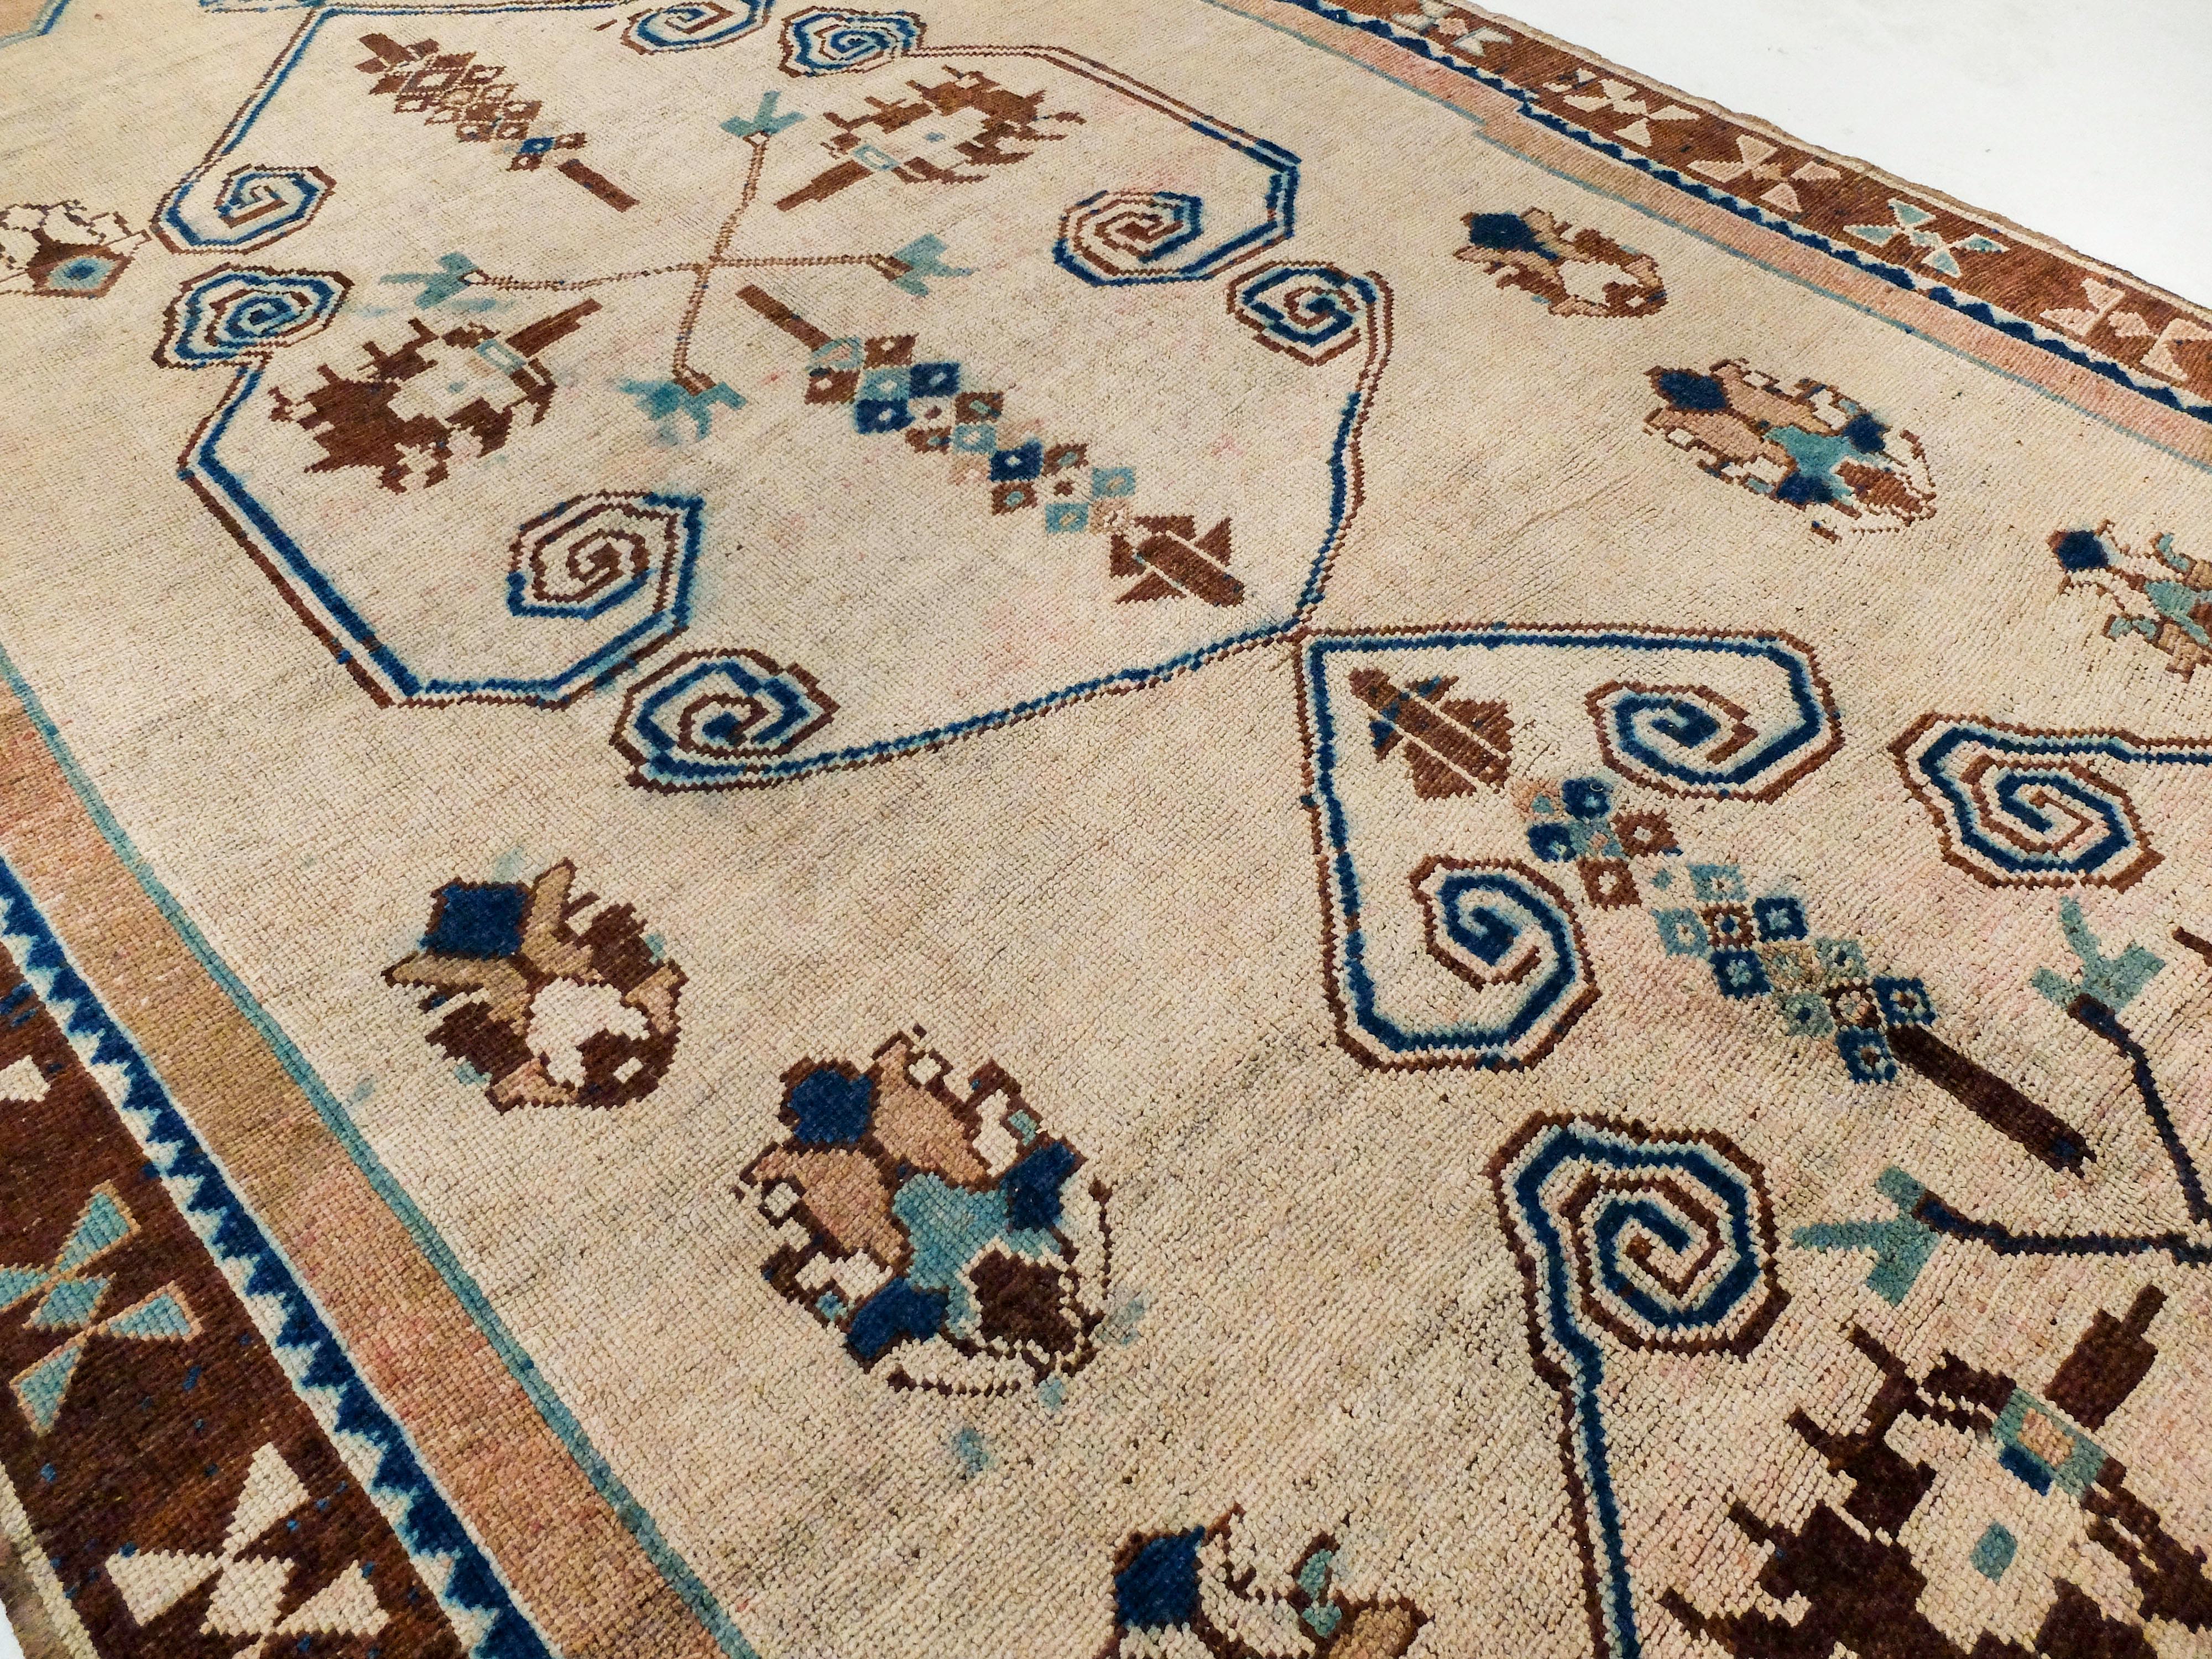 This Turkish antique rug has a distinctive and almost playful pattern. The two main shapes are hand-drawn-like and not perfectly symmetrical adding to the rug's unique quality. Its playful elements include lines with spirals at the end and freely